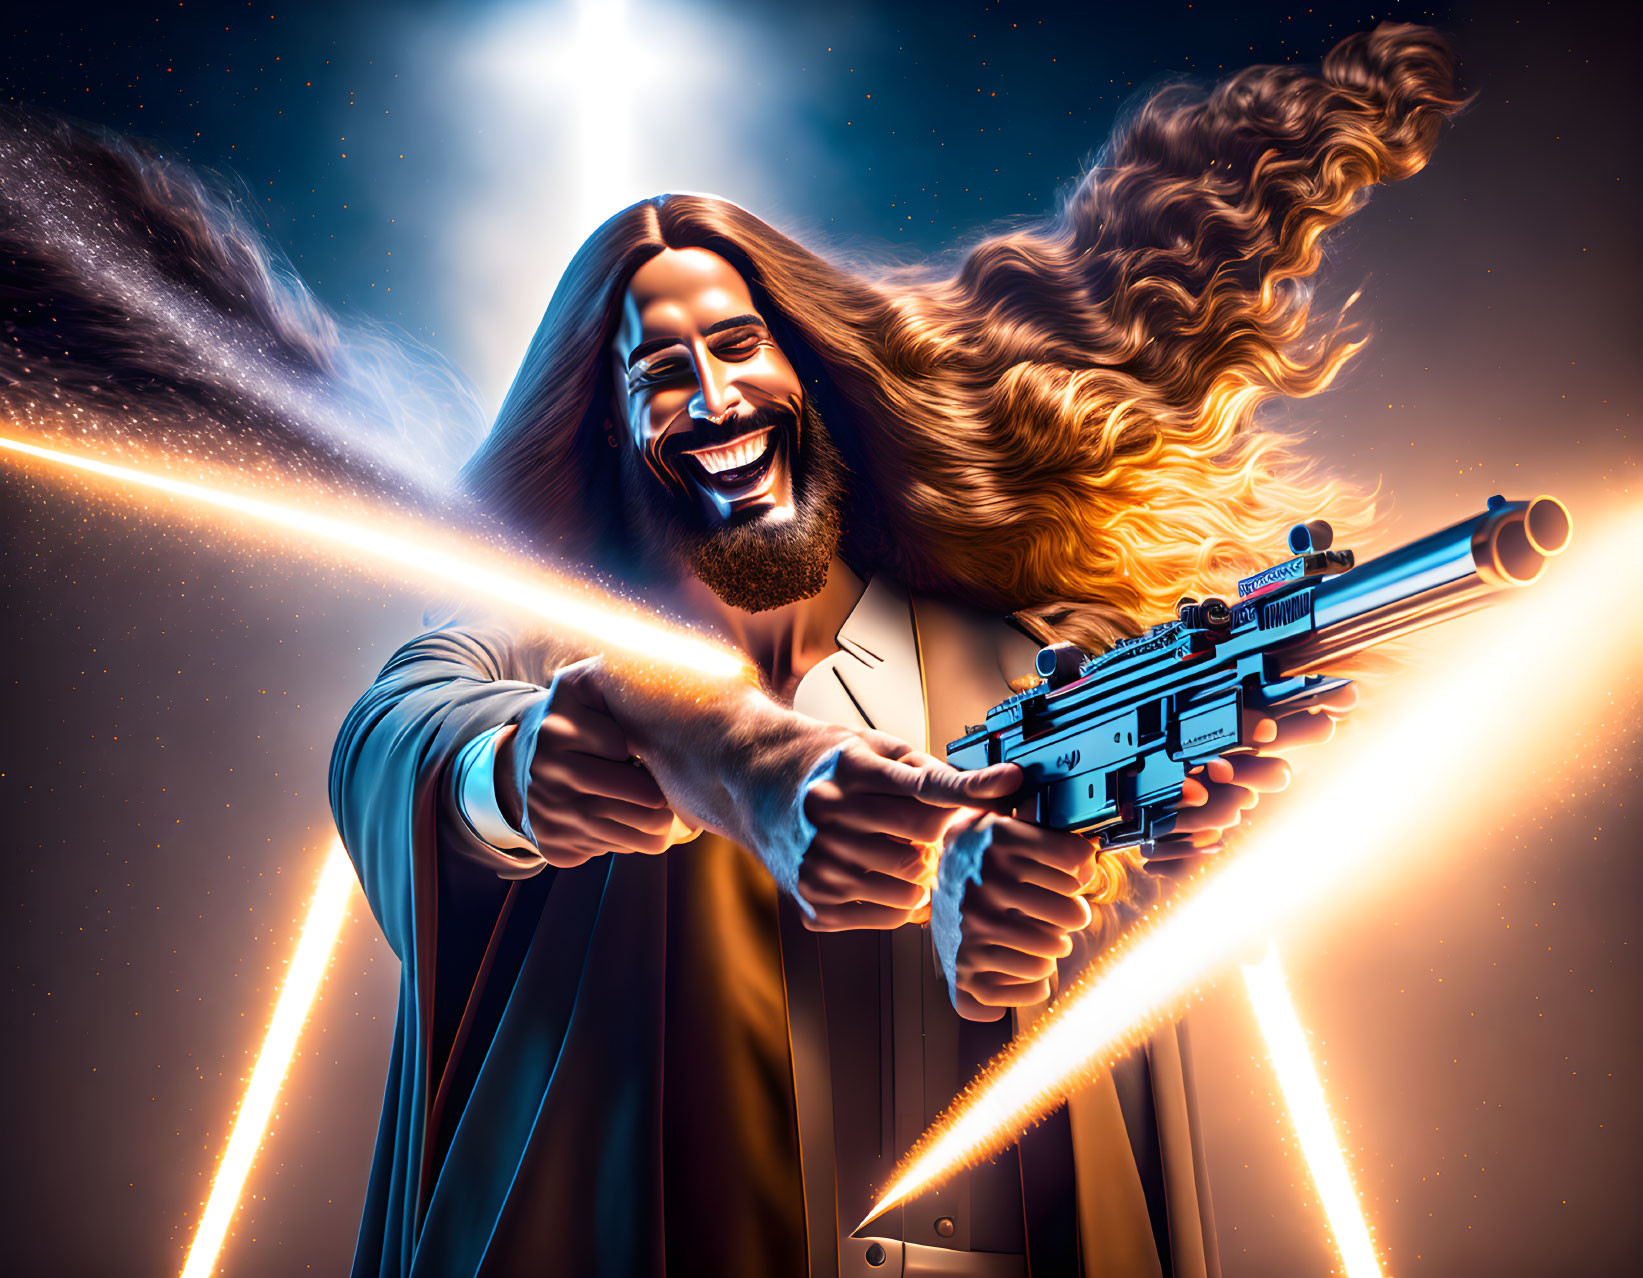 Smiling man with futuristic blasters in cosmic setting